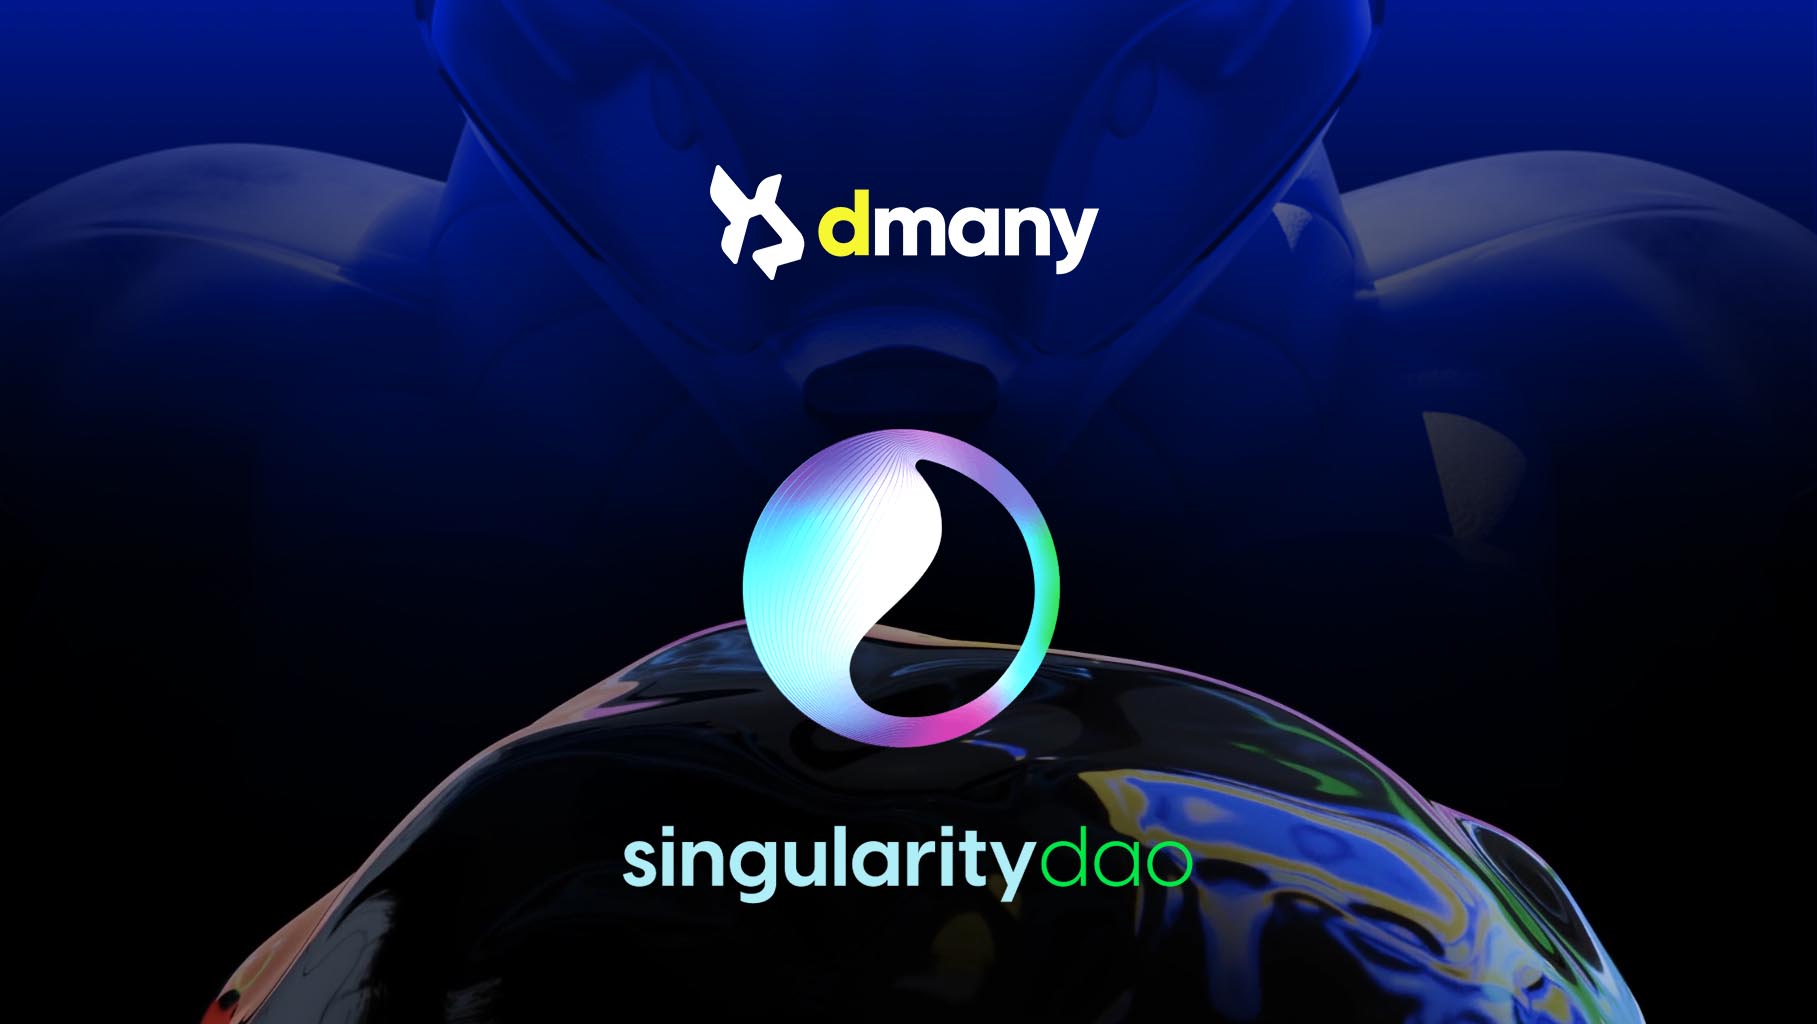 Dmany Forms Strategic Partnership with SingularityDAO to Innovate Social Engagement Using AI and DeFi